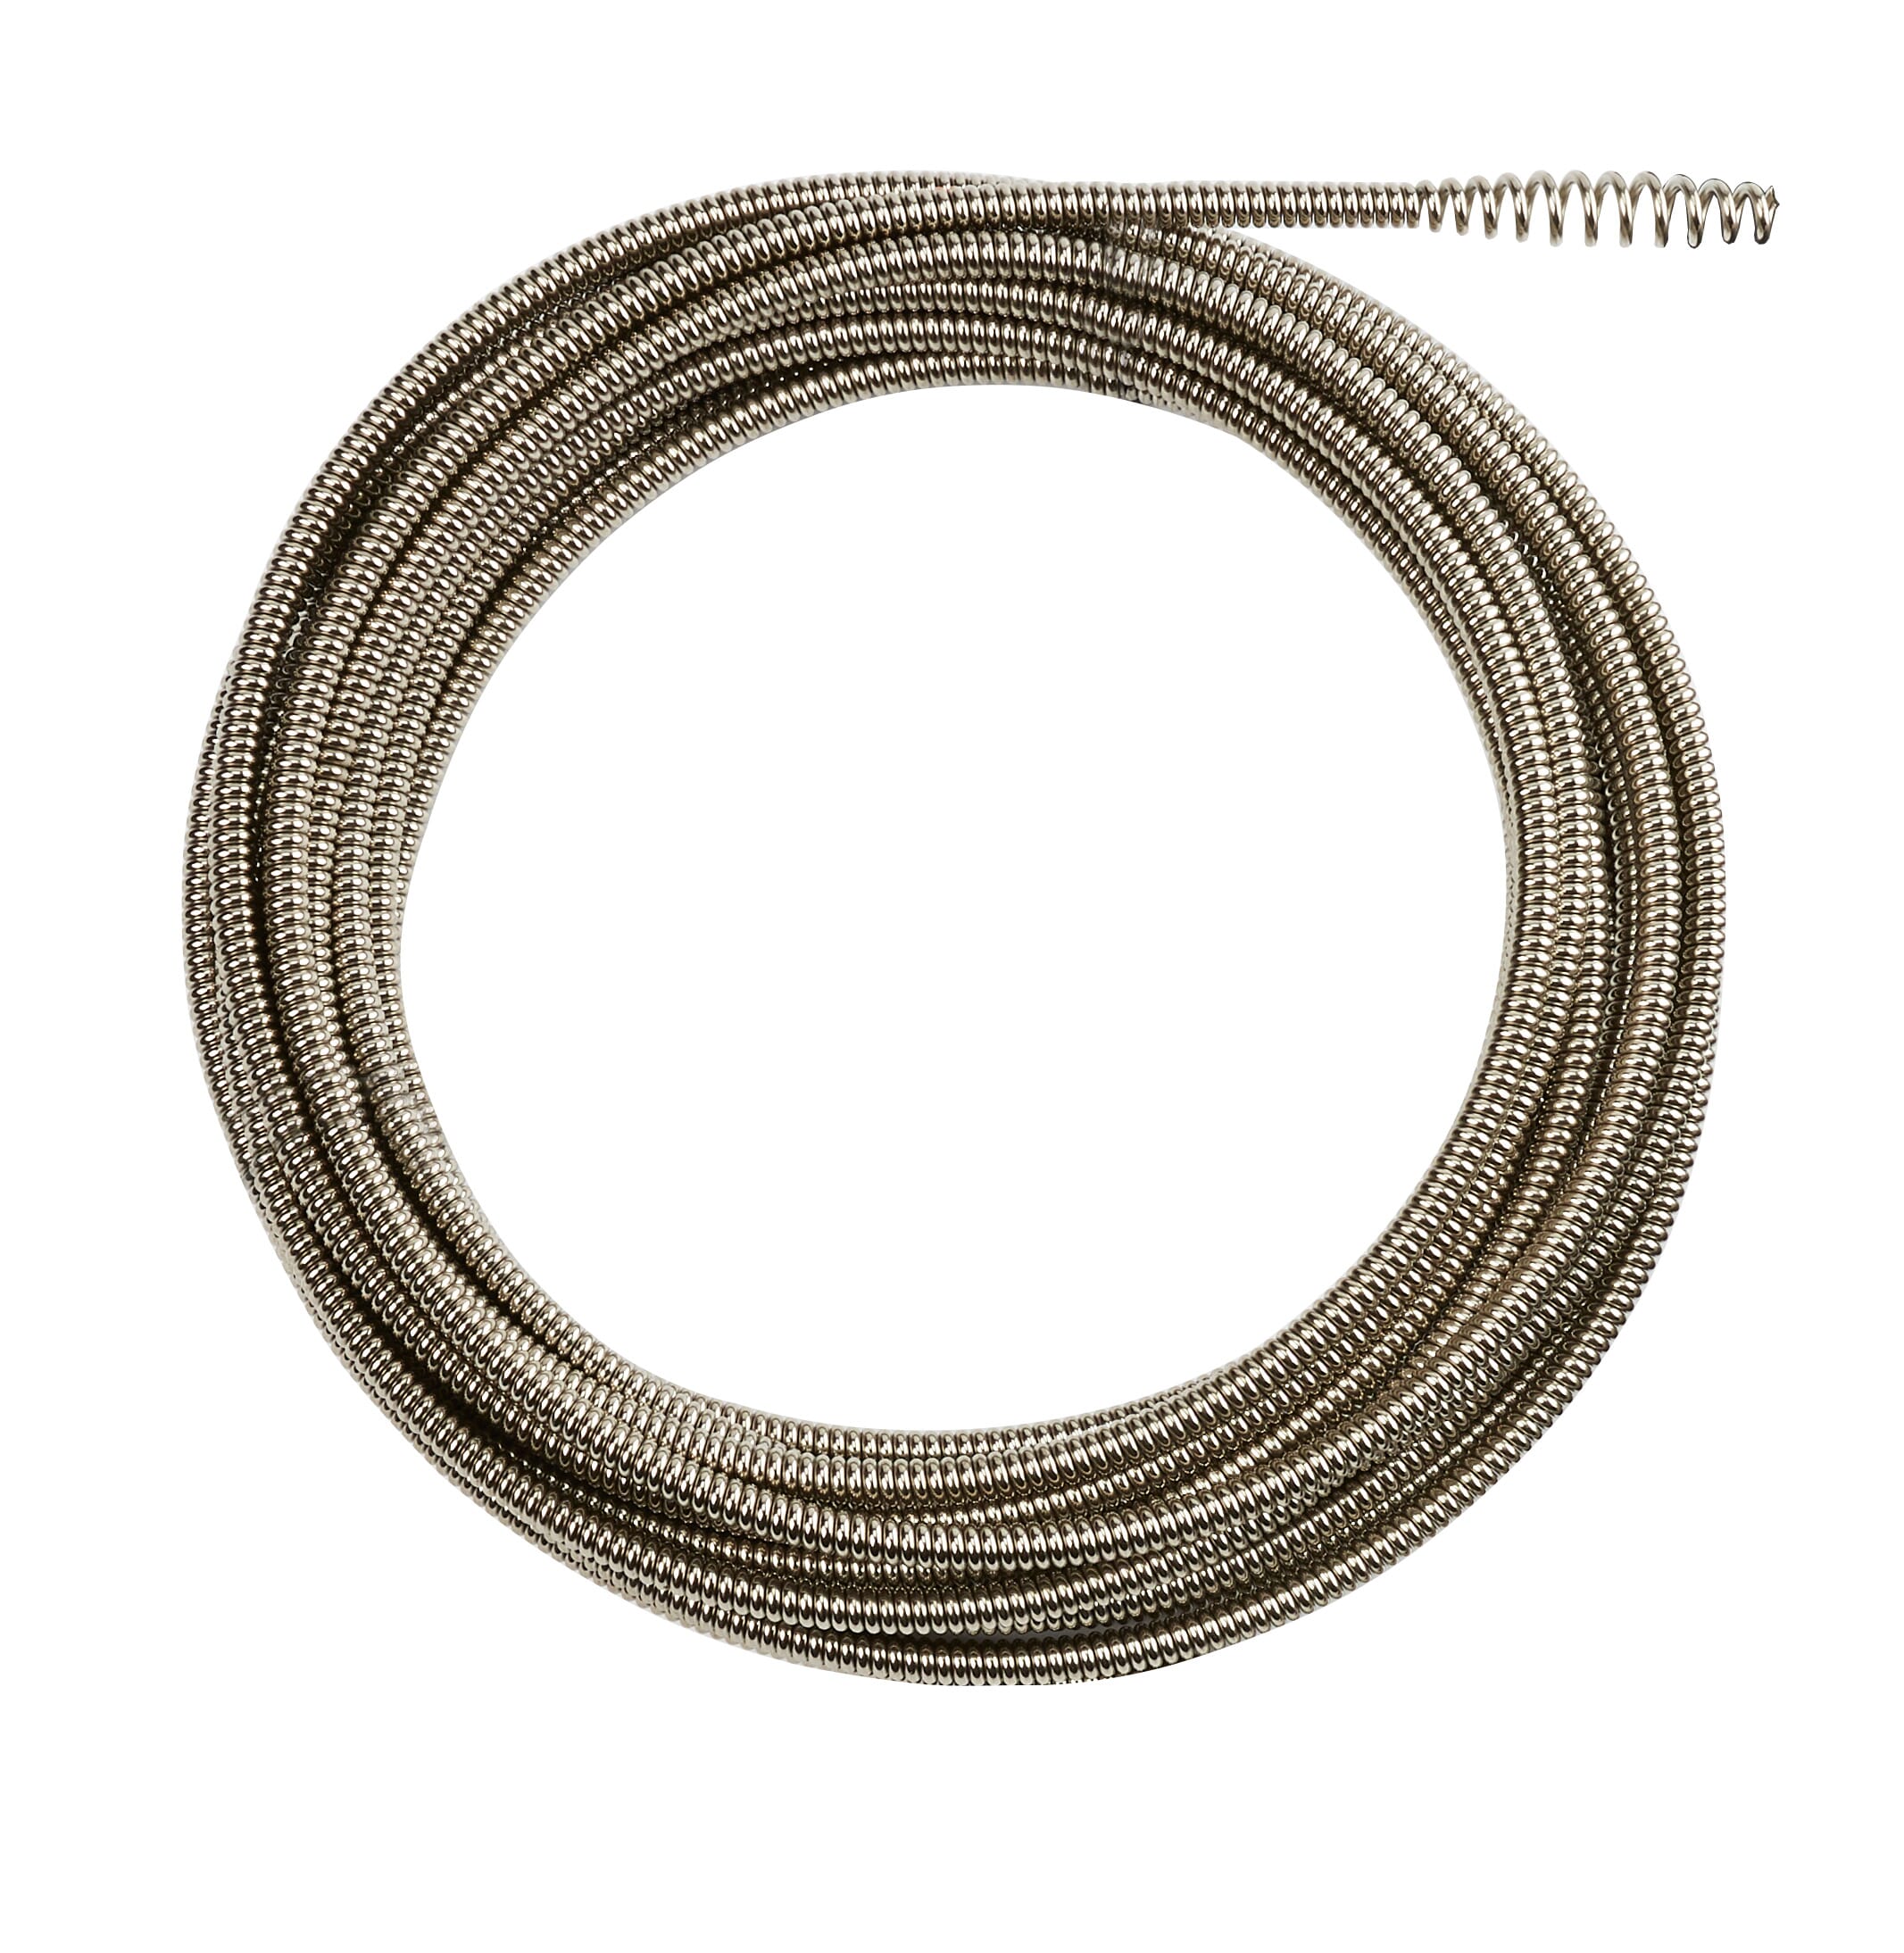 Milwaukee® 48-53-2671 Inner Core Bulb Head Drain Cleaning Cable, 1/4 in, Steel, For Use With Drain Cleaning Machines, 1-1/4 to 2-1/2 in Drain Line